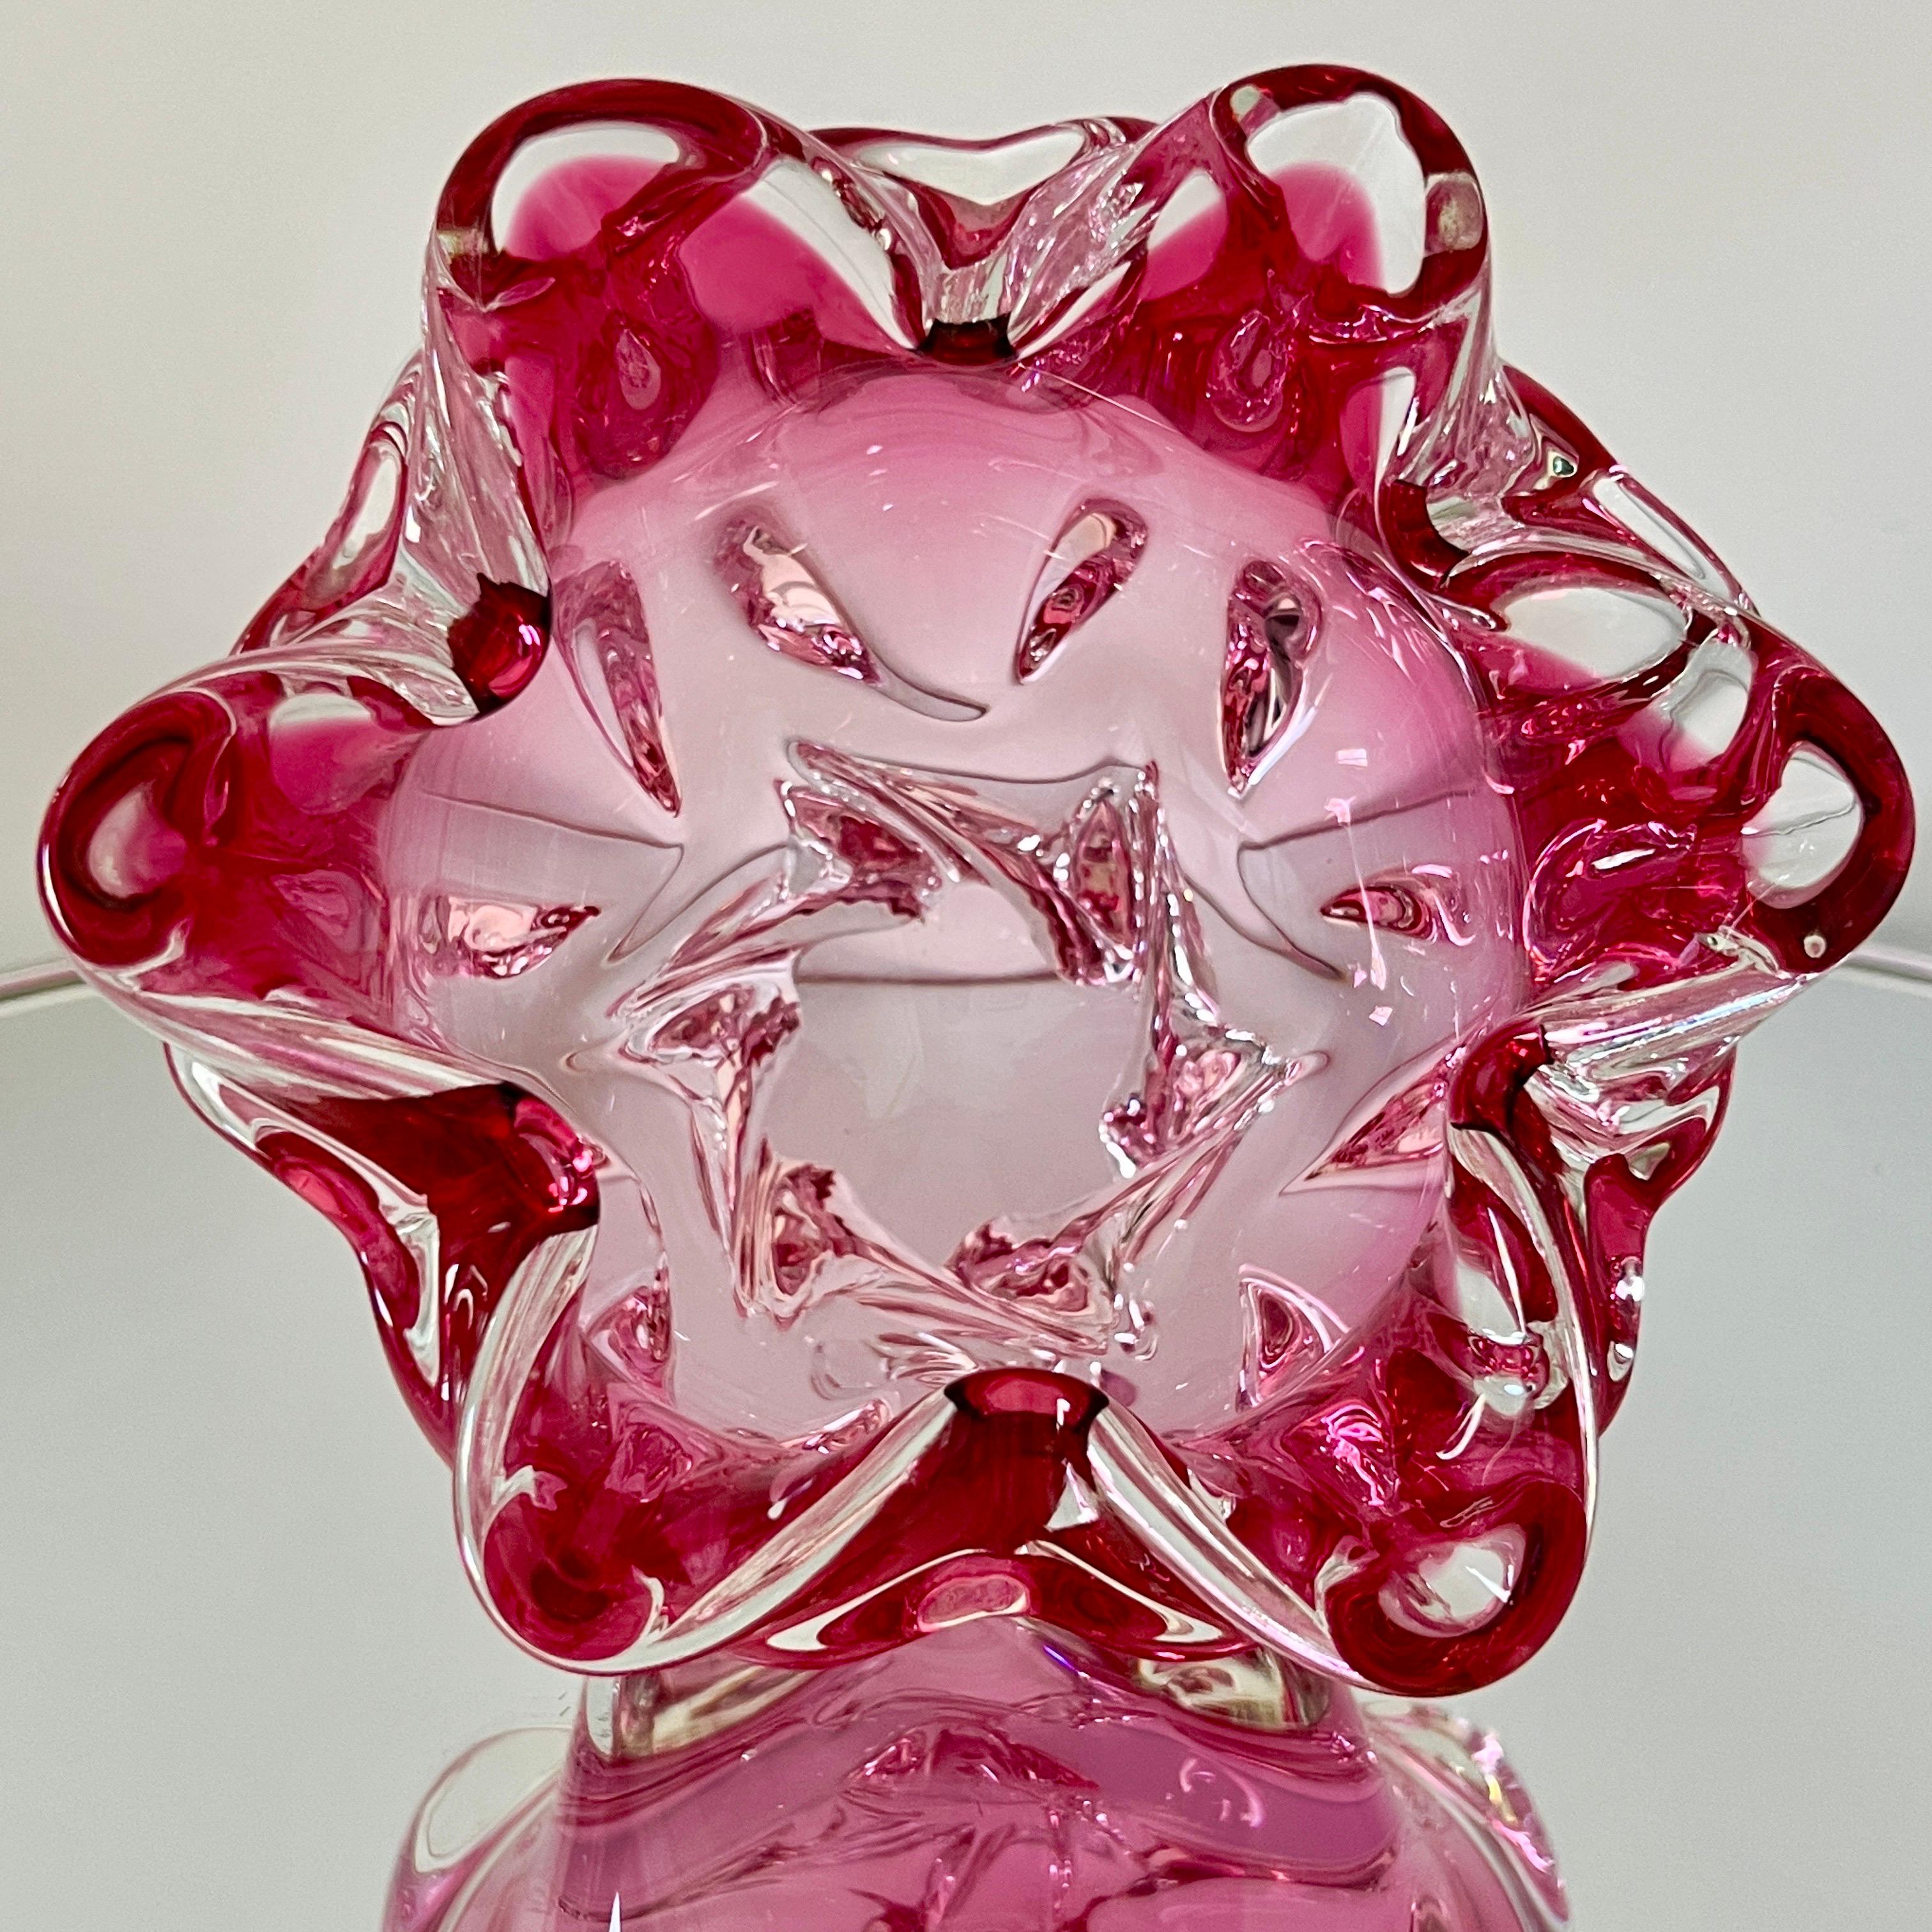 Mid-20th Century Pink Murano Floral Vase with Footed Base by Fratelli Toso, c. 1950's For Sale